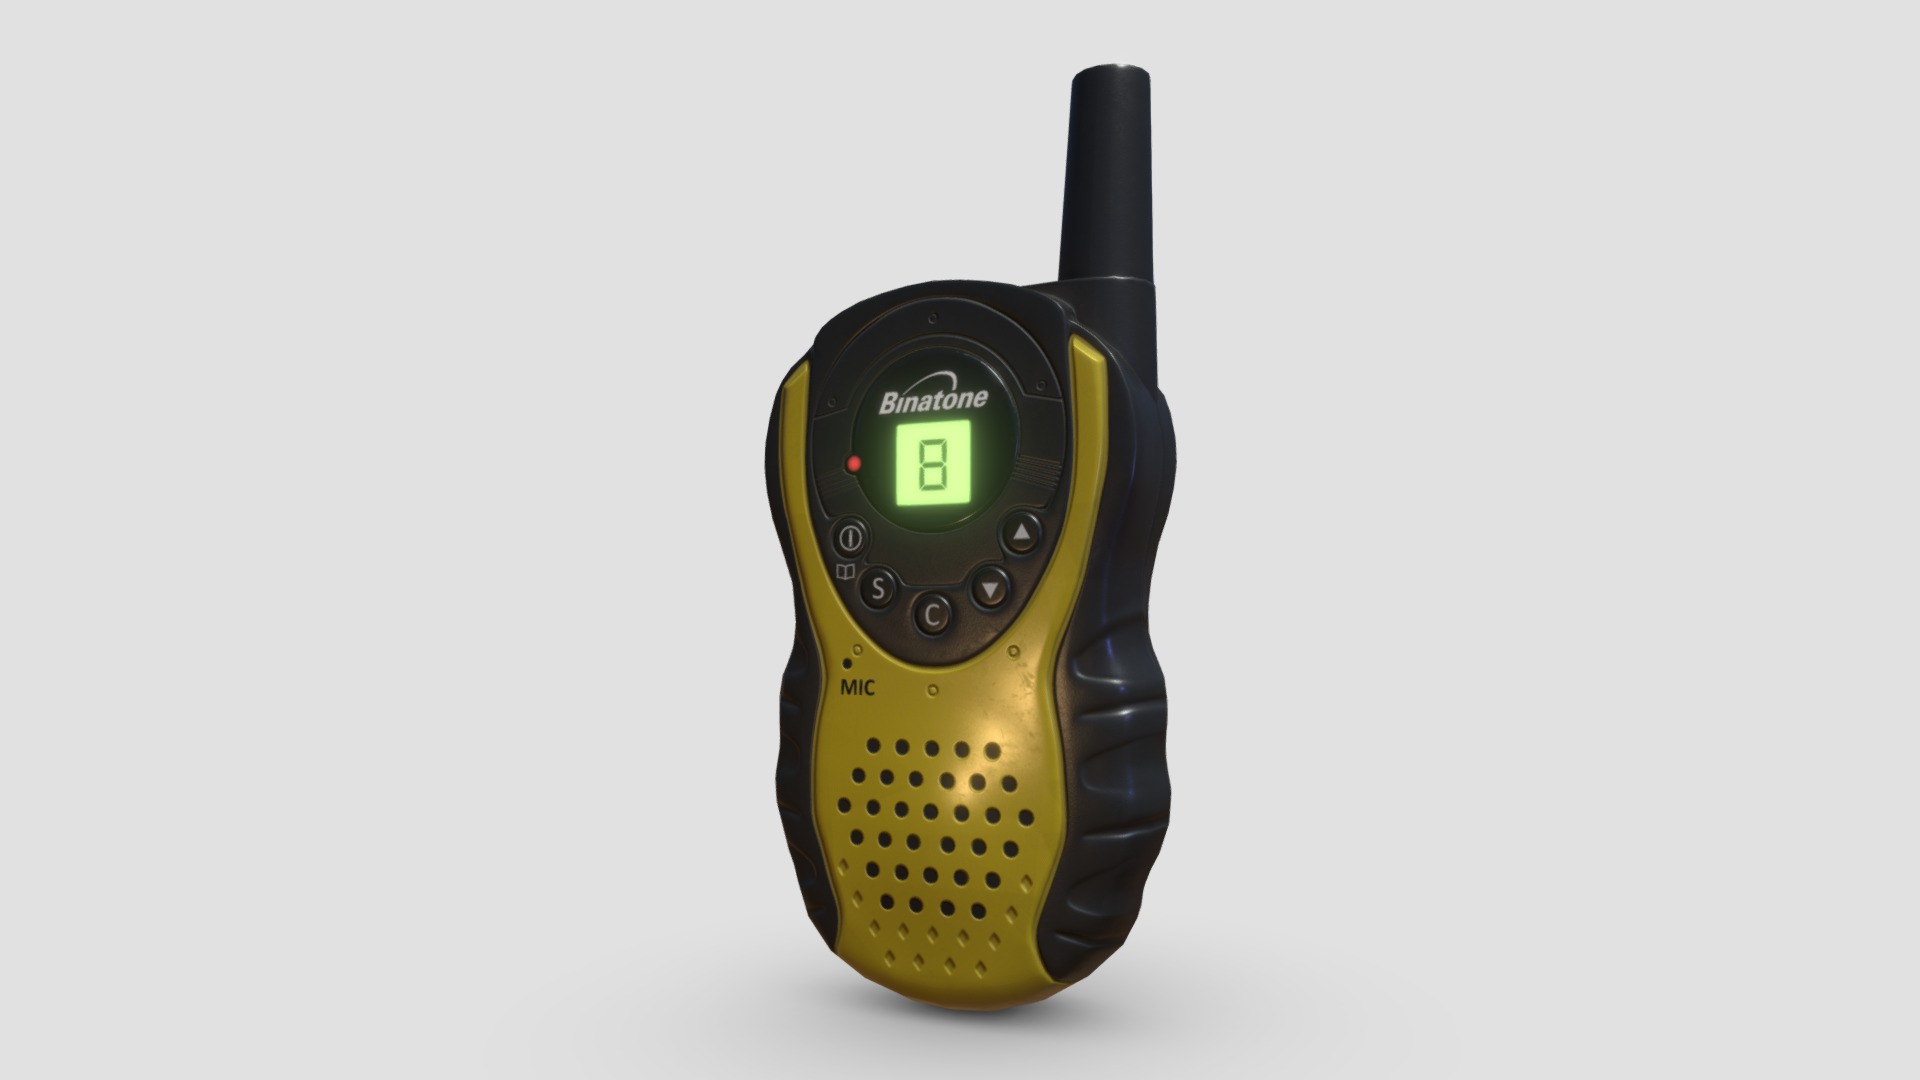 3D model Binatone Latitude 100 Walkie Talkie - This is a 3D model of the Binatone Latitude 100 Walkie Talkie. The 3D model is about a black and yellow wristwatch.